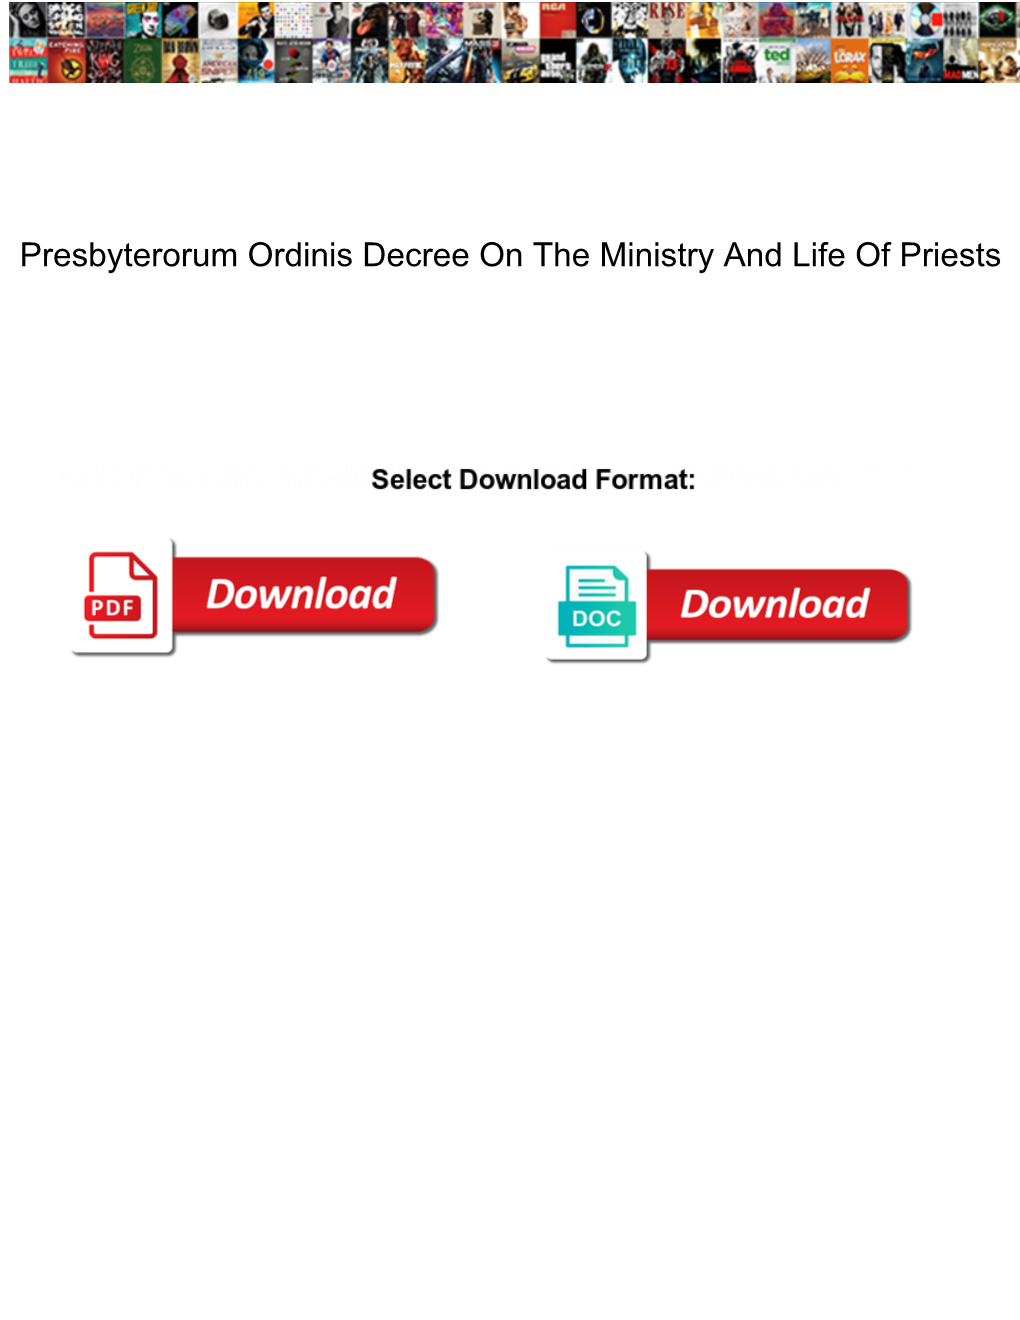 Presbyterorum Ordinis Decree on the Ministry and Life of Priests